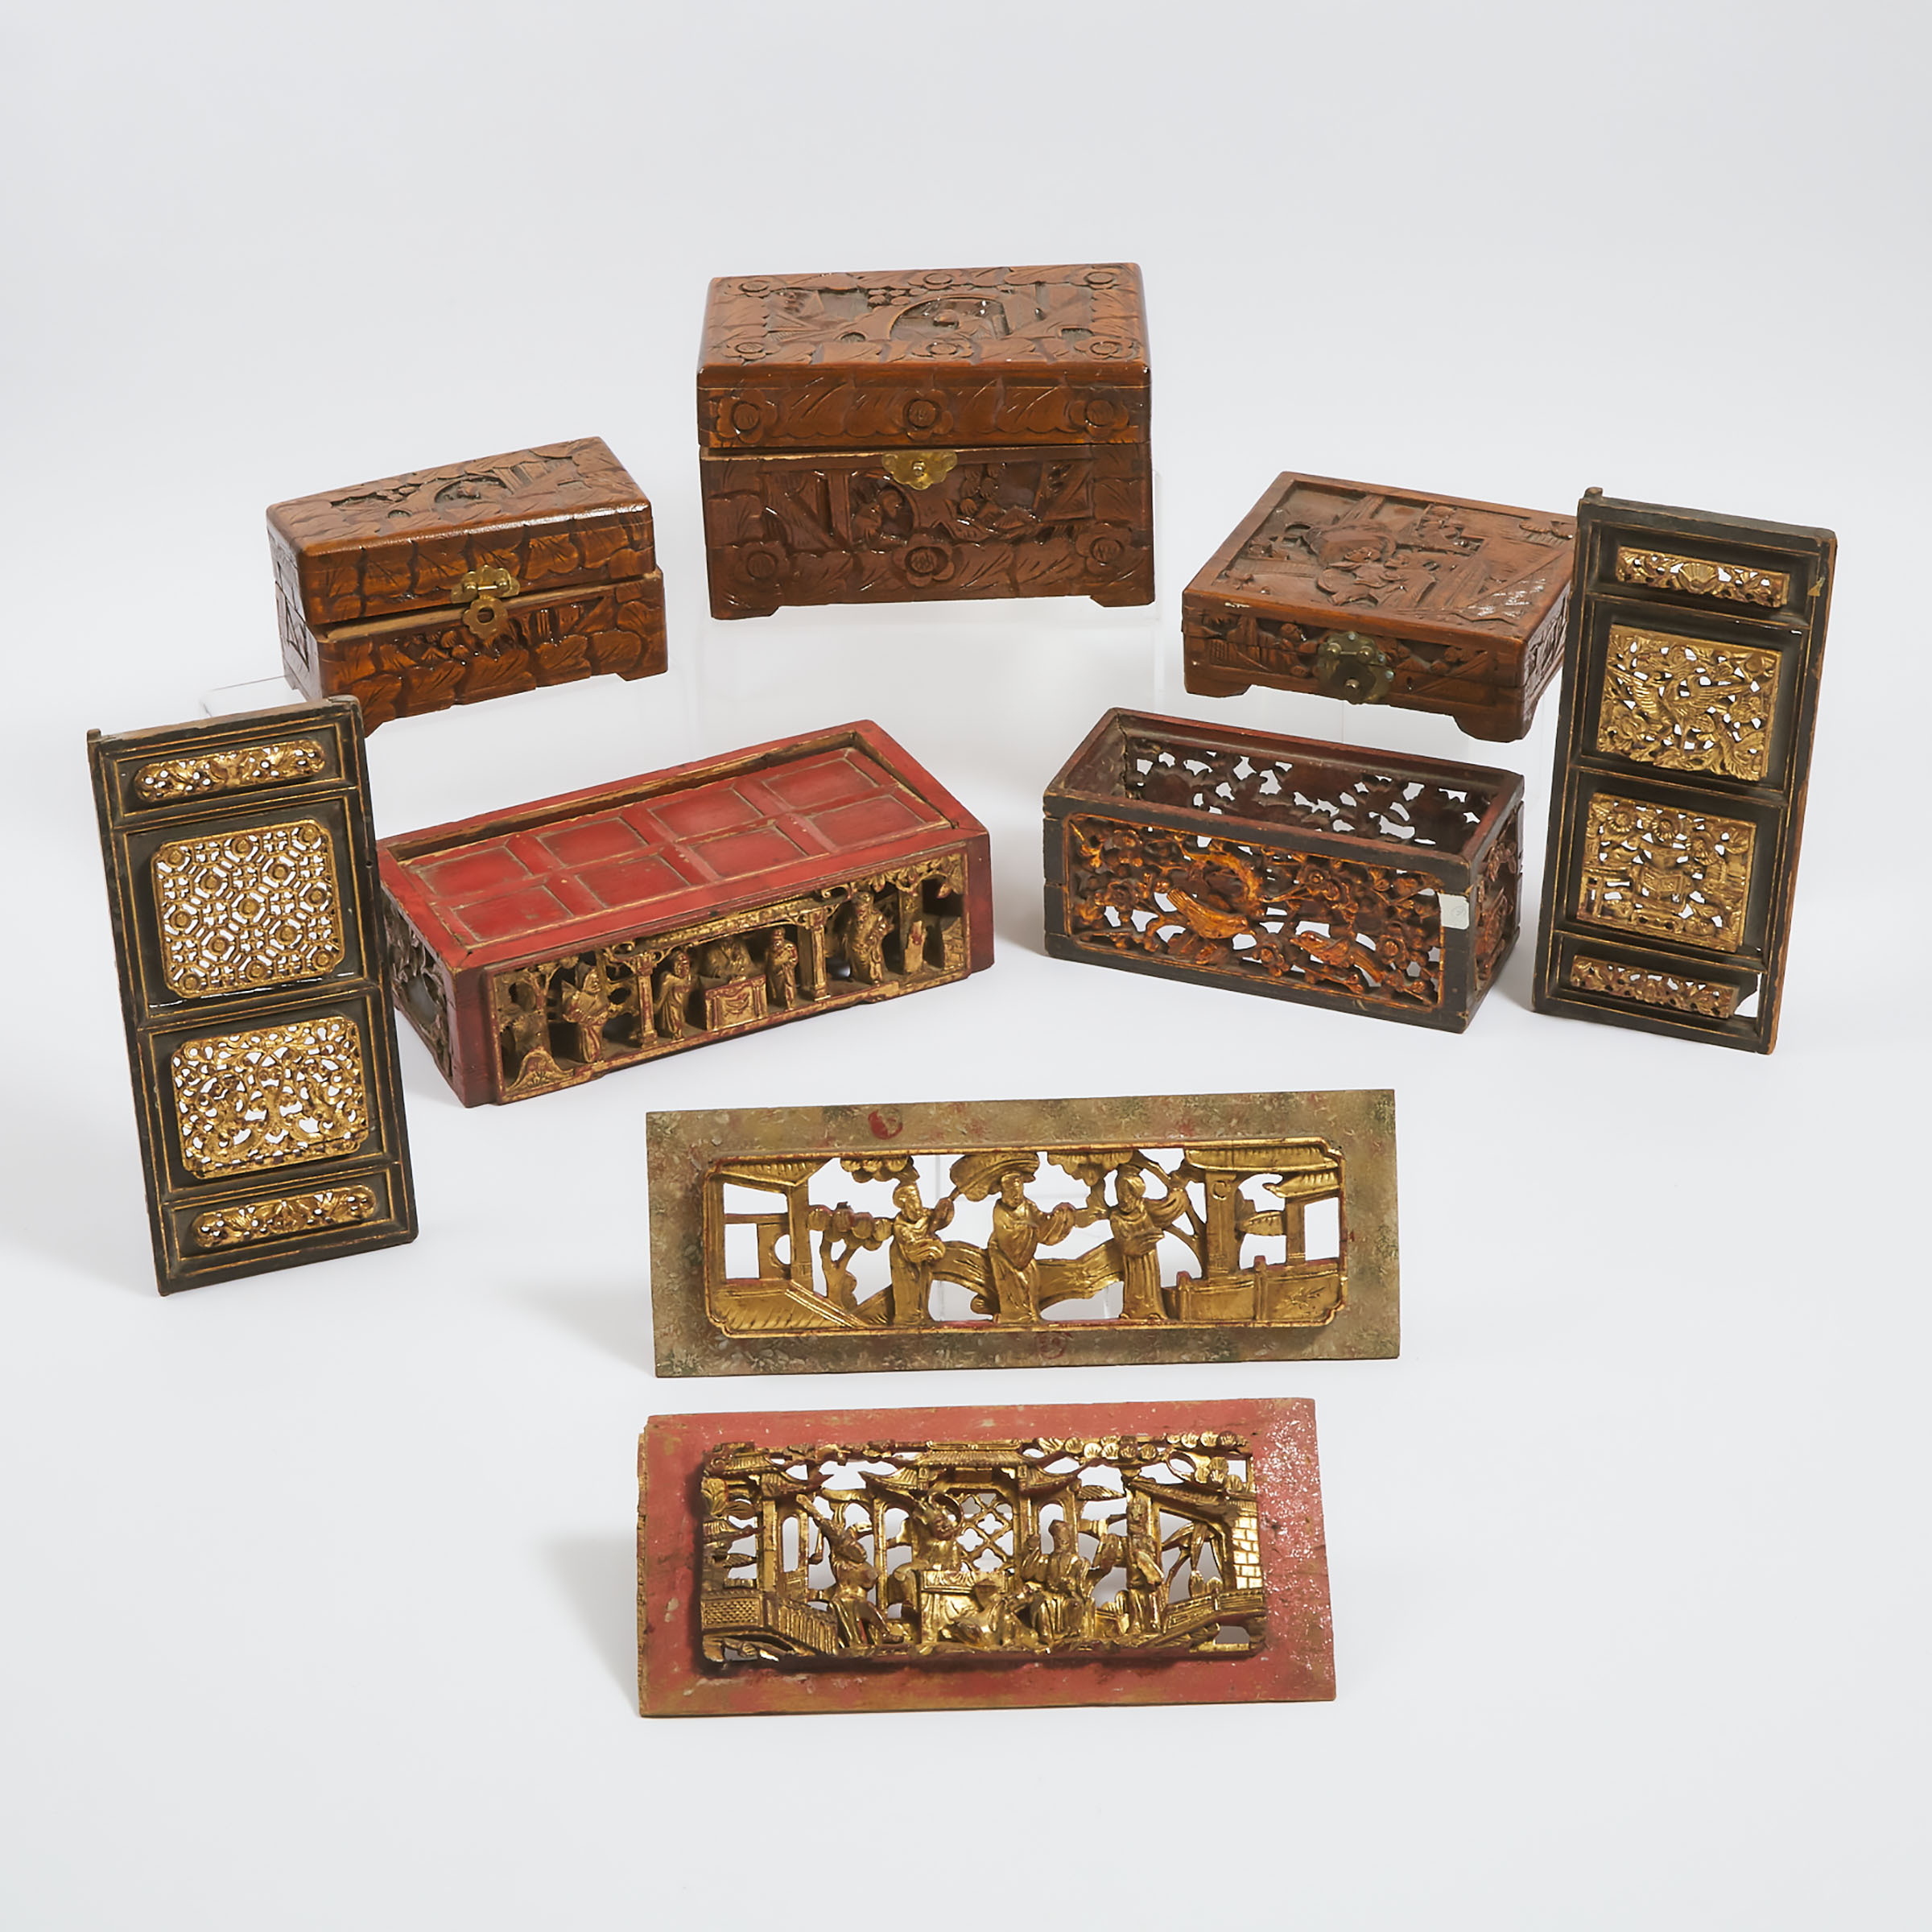 A Group of Nine Chinese Gilt and Wood Carved Panels and Boxes, 19th Century and Later